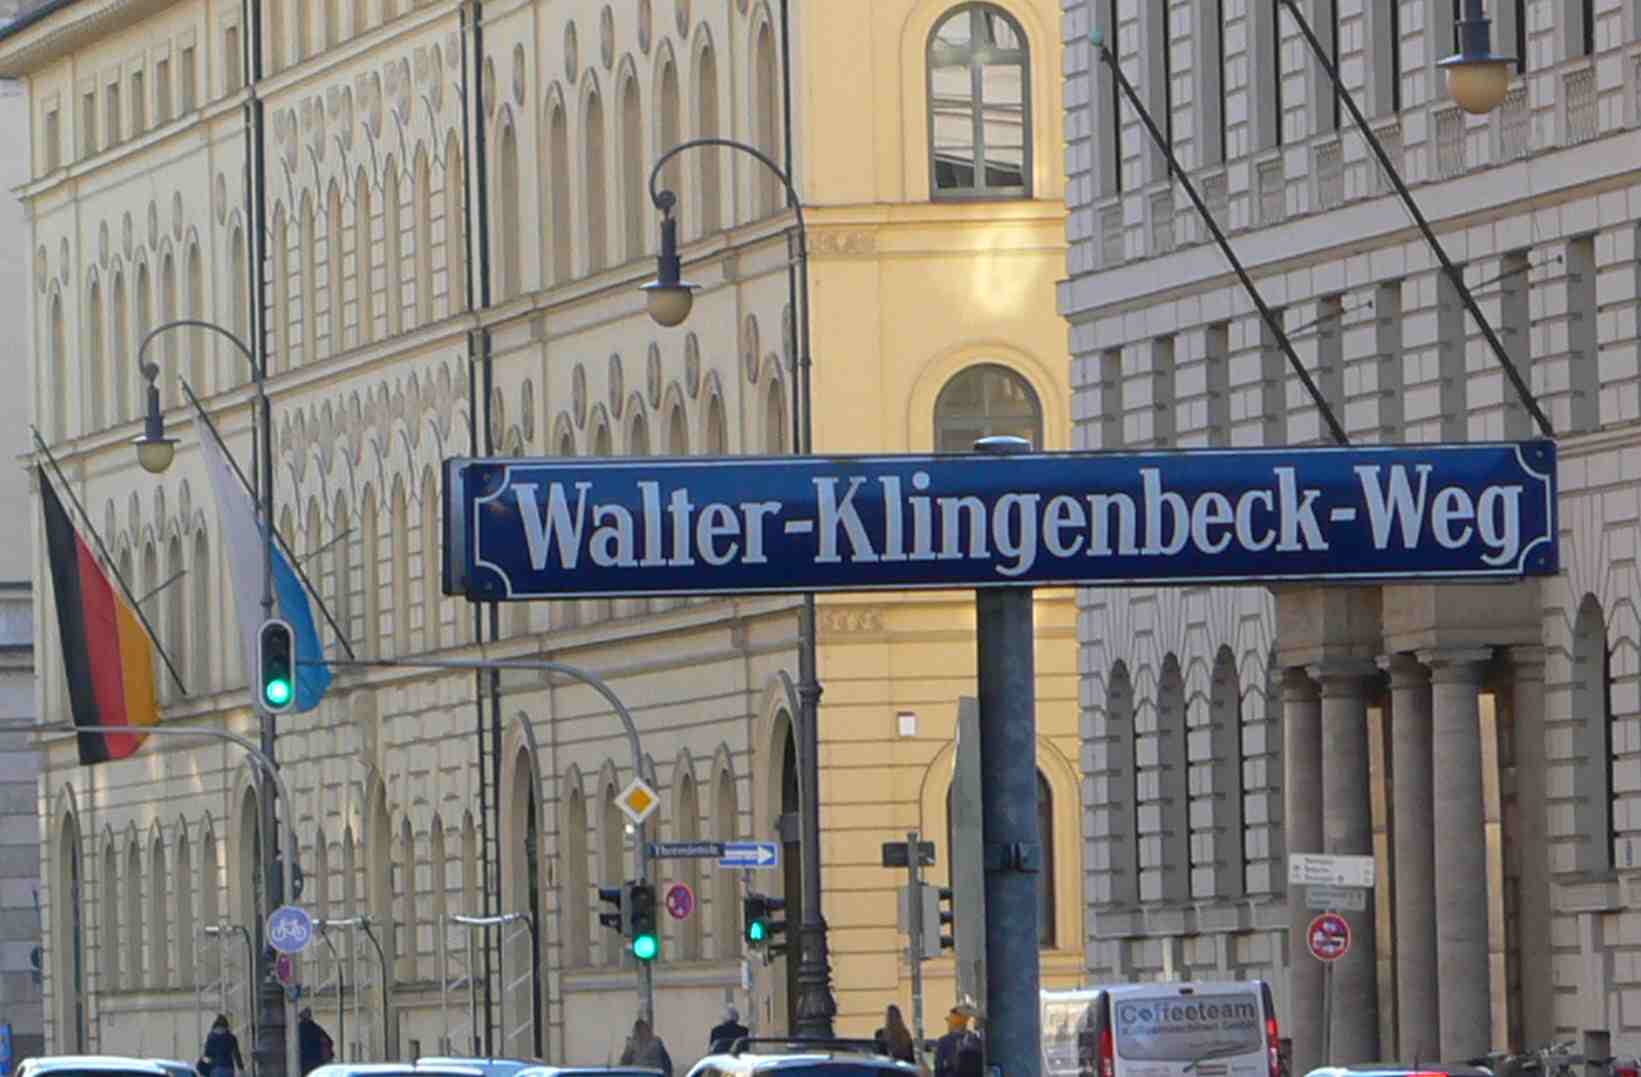  a Munich alley named after Walter Klingenbeck who served in German Resistance against the Nazis